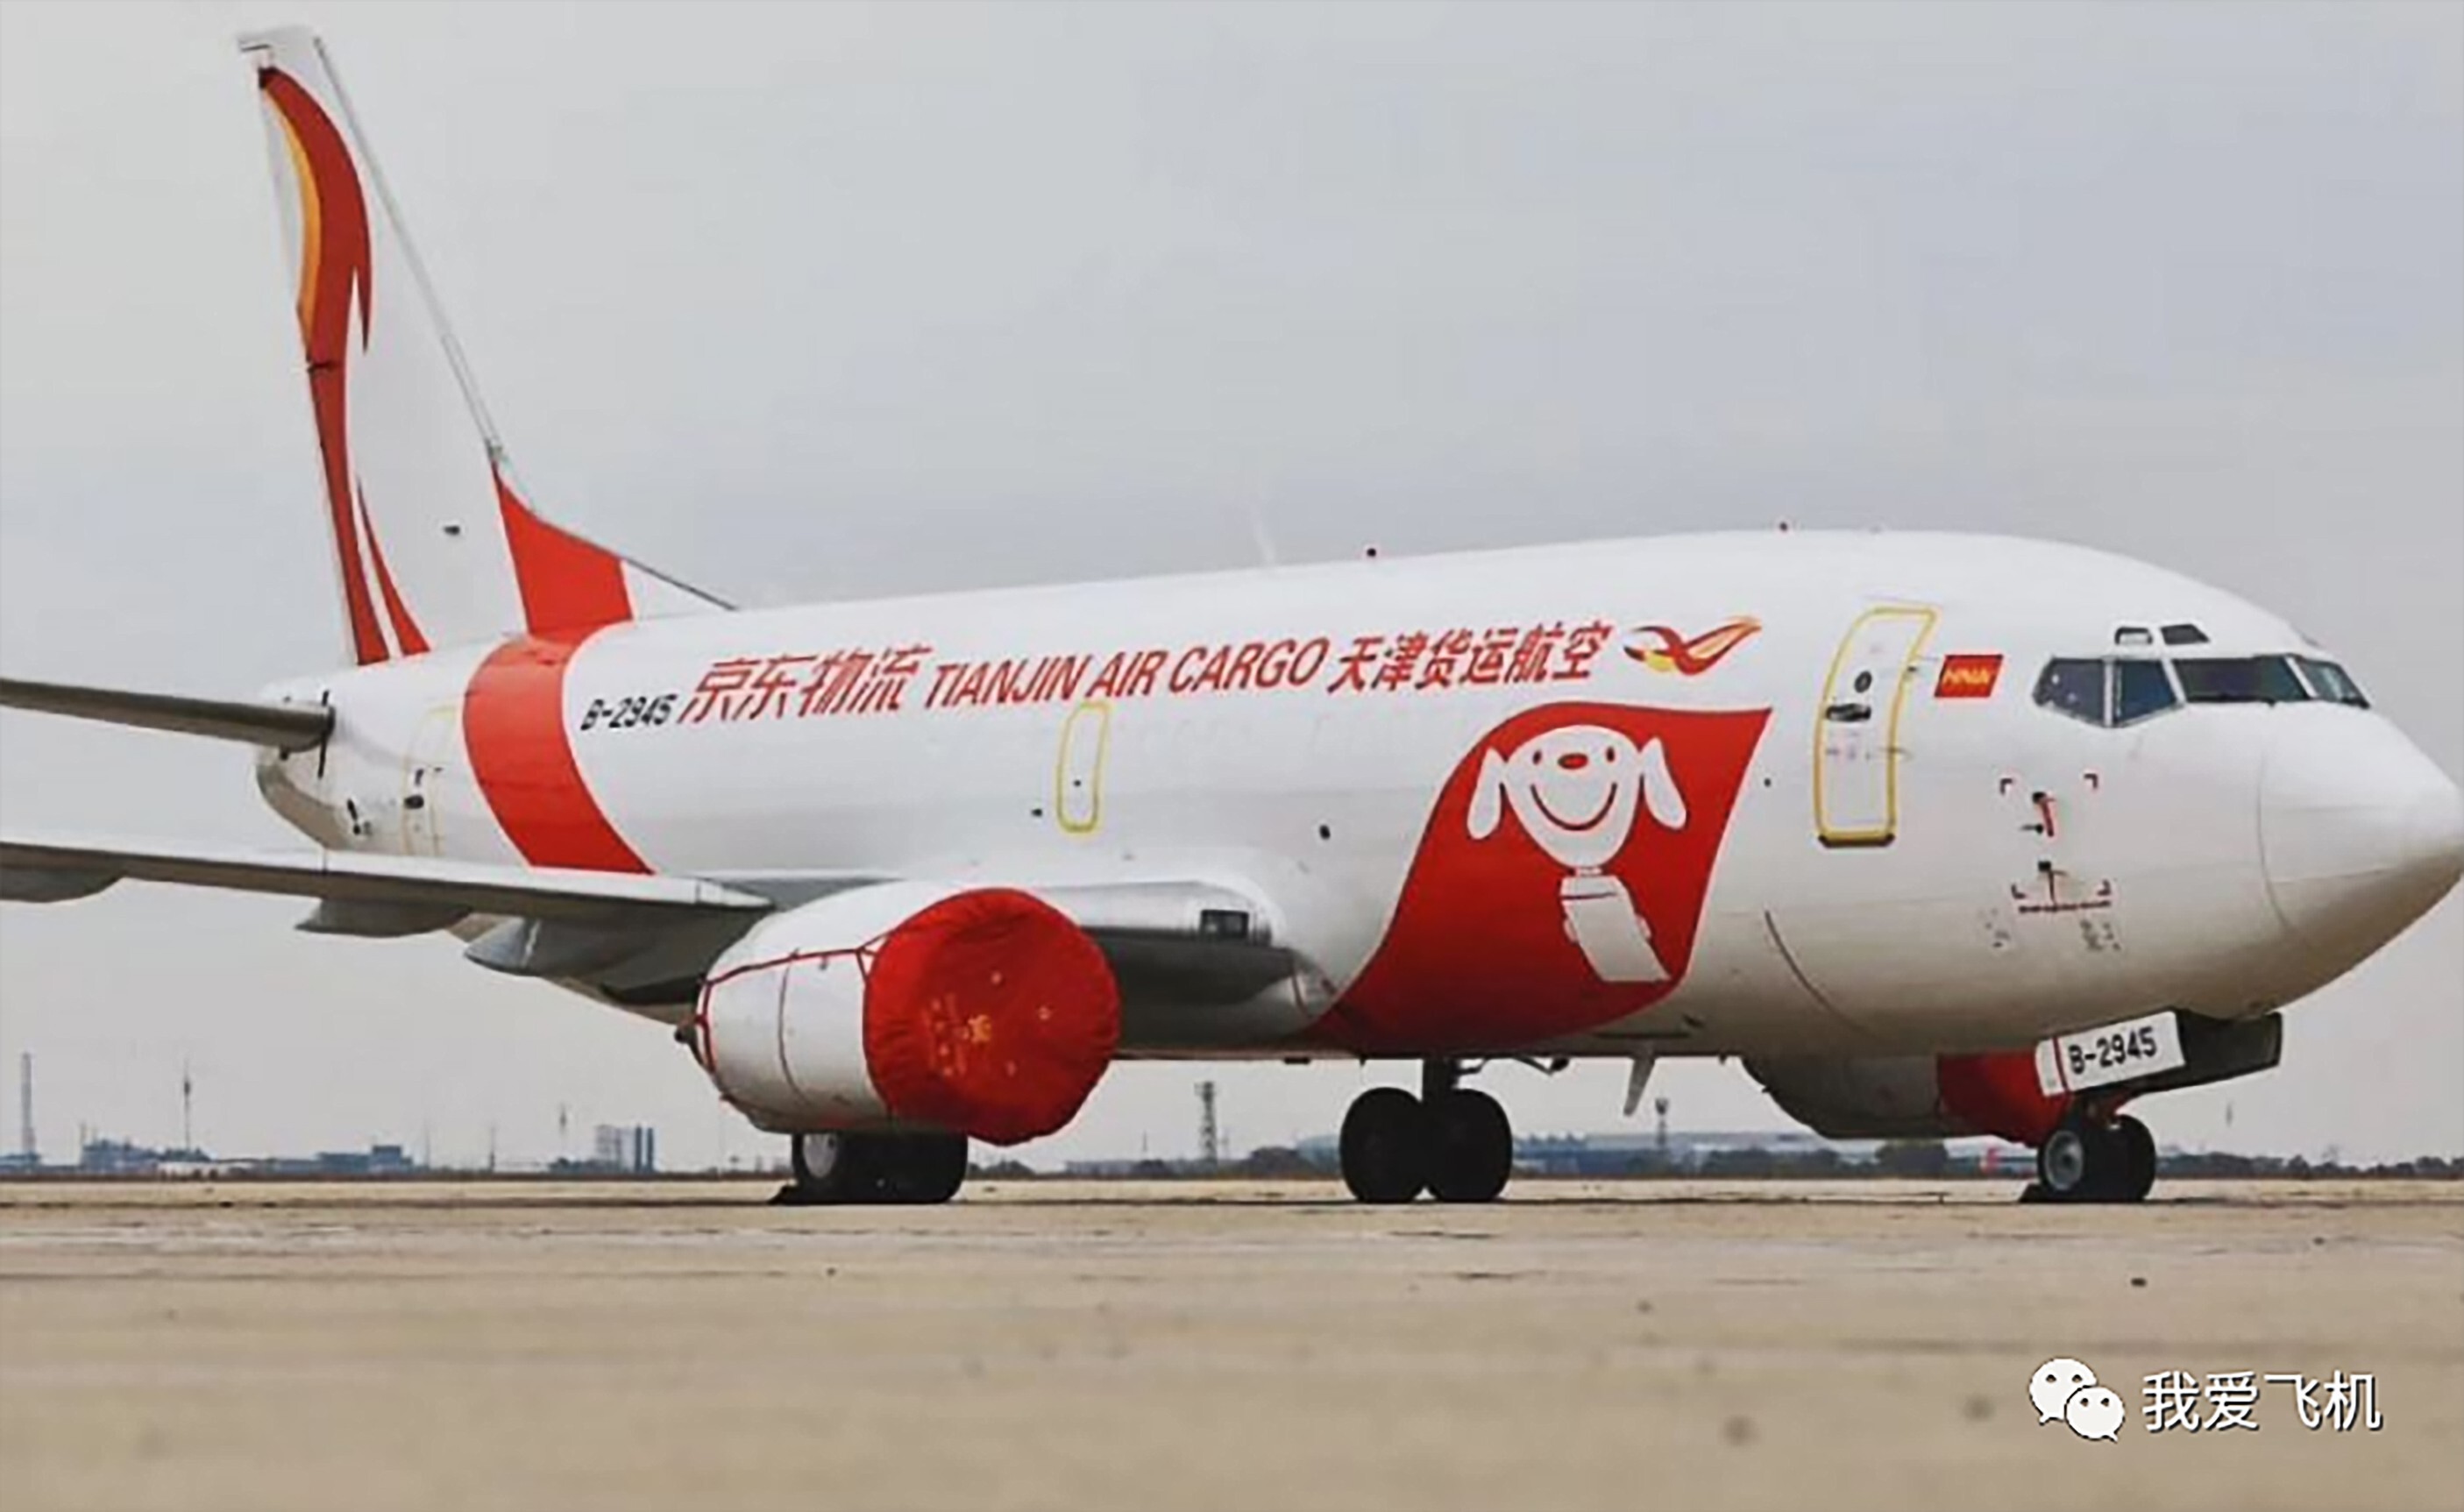 Chinese e-commerce giant JD.com, which is owned by billionaire Richard Liu Qiangdong, is on track to become the first e-commerce player with it’s own air cargo fleet. Photo: Handout